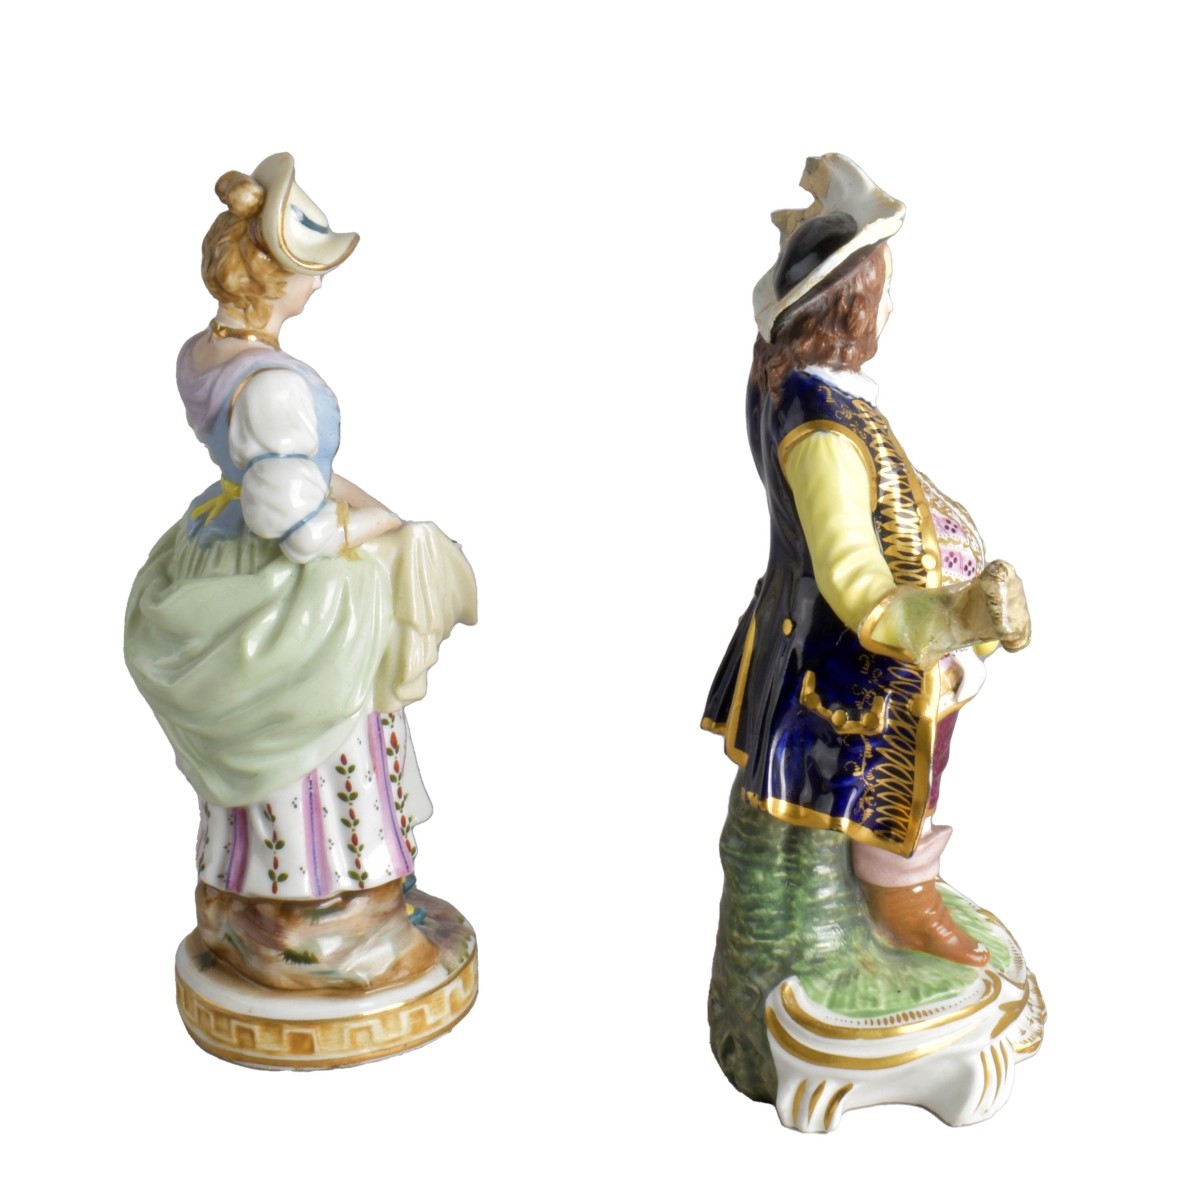 Grouping of Two Porcelain Figurines